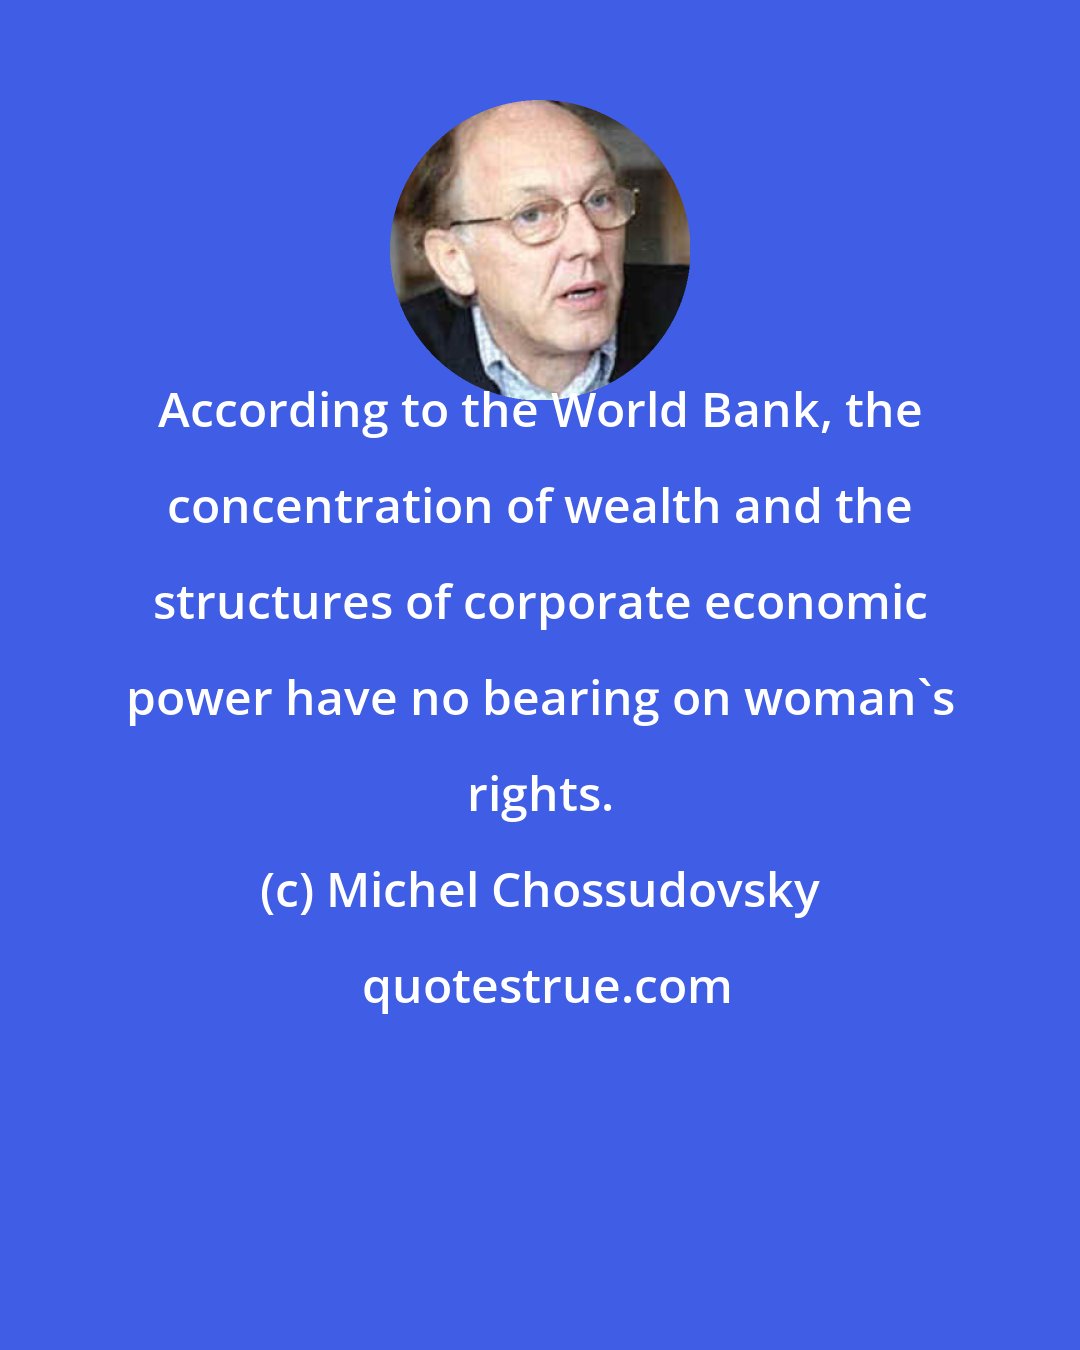 Michel Chossudovsky: According to the World Bank, the concentration of wealth and the structures of corporate economic power have no bearing on woman's rights.